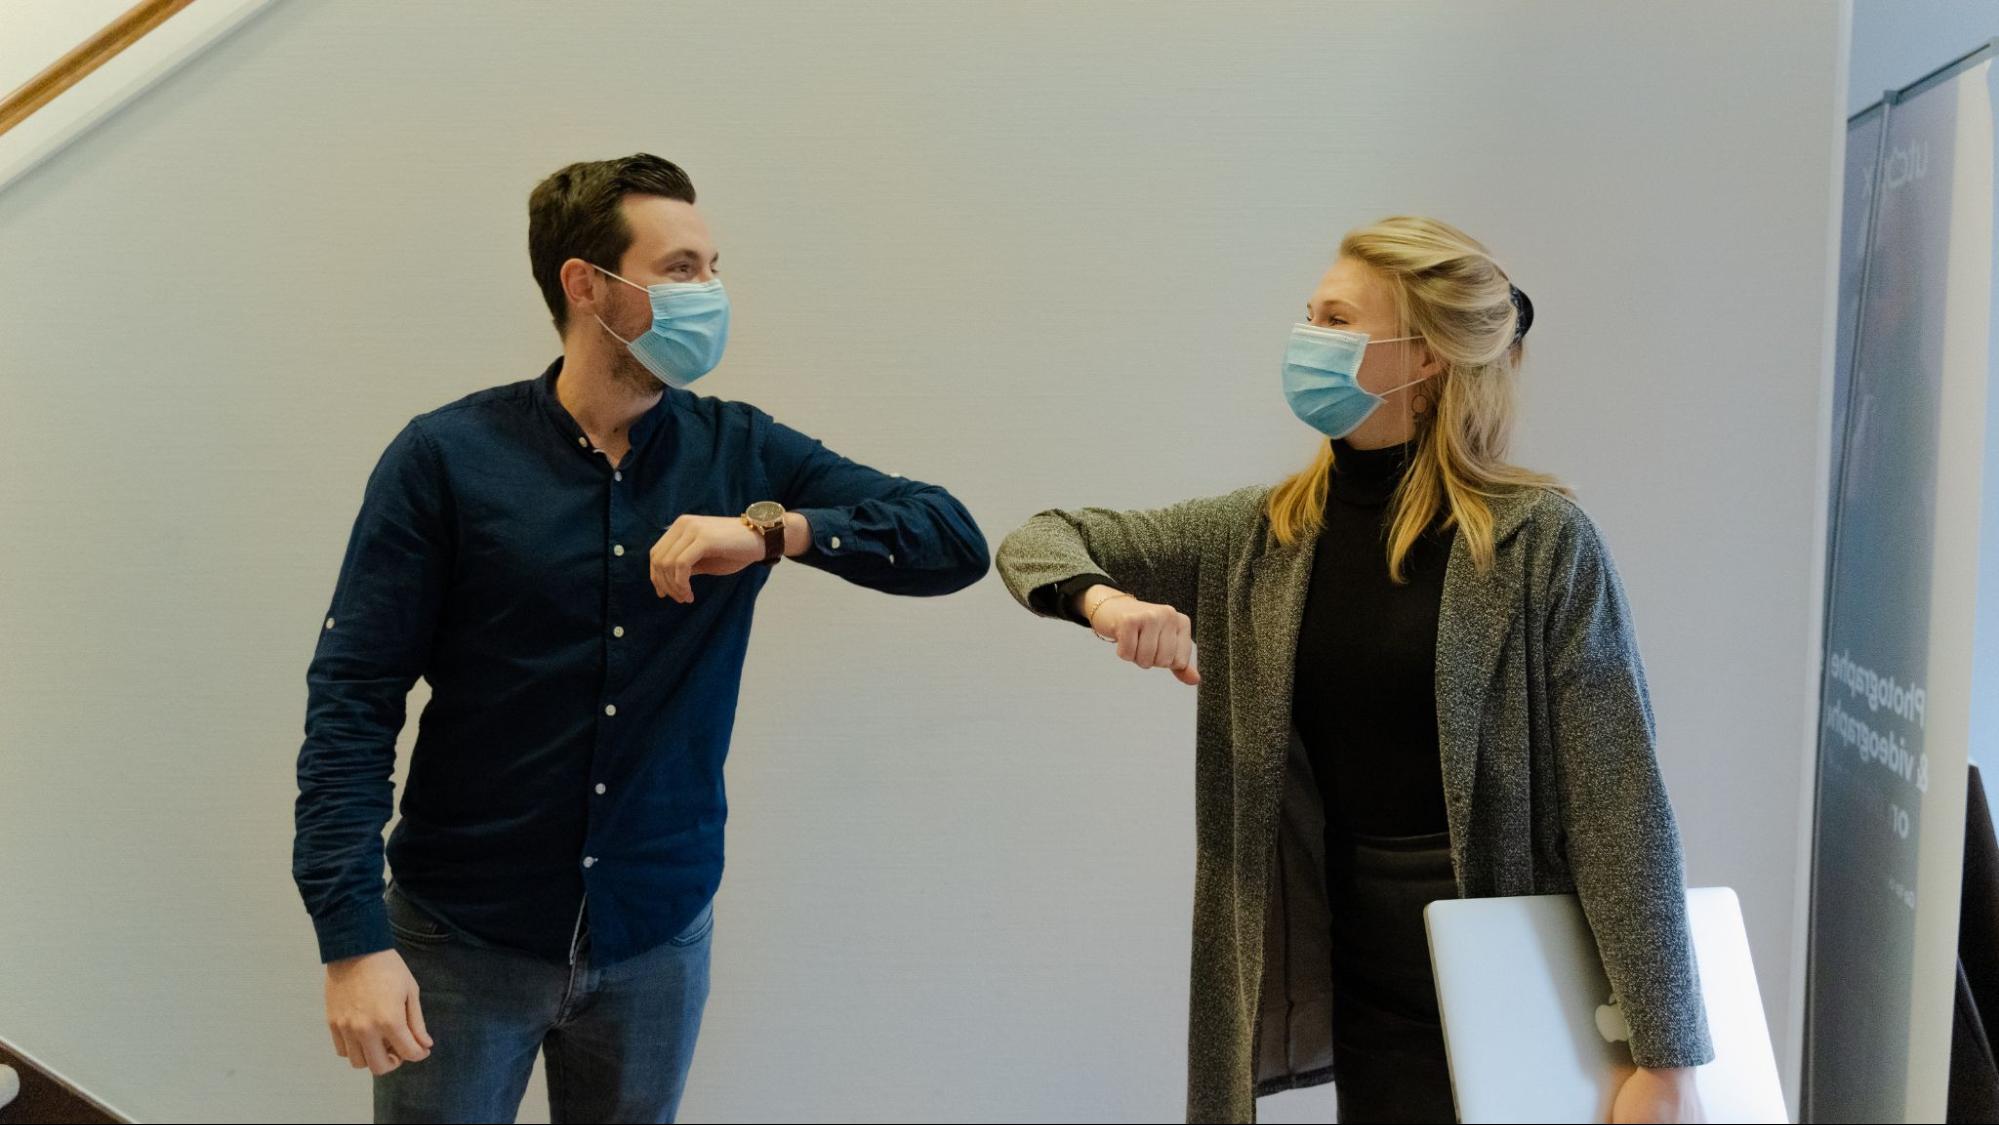 Two people wearing masks associated with avoiding spread of COVID 19 are bumping elbows in greeting.